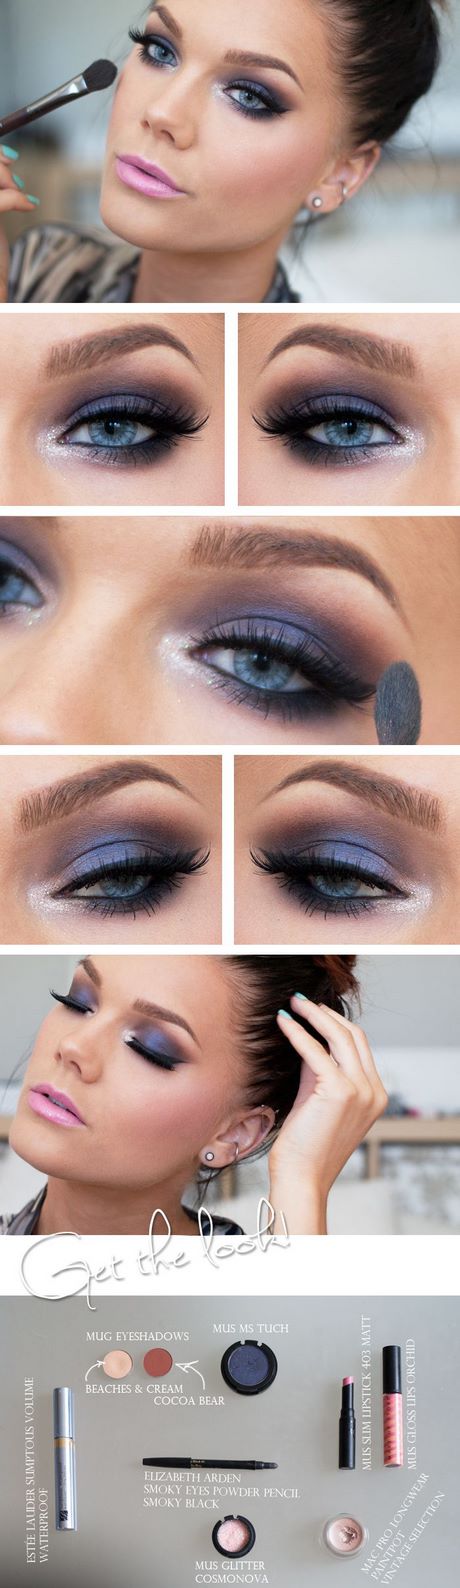 2022-new-years-eve-makeup-tutorial-10_11 2022 new years eve make-up tutorial